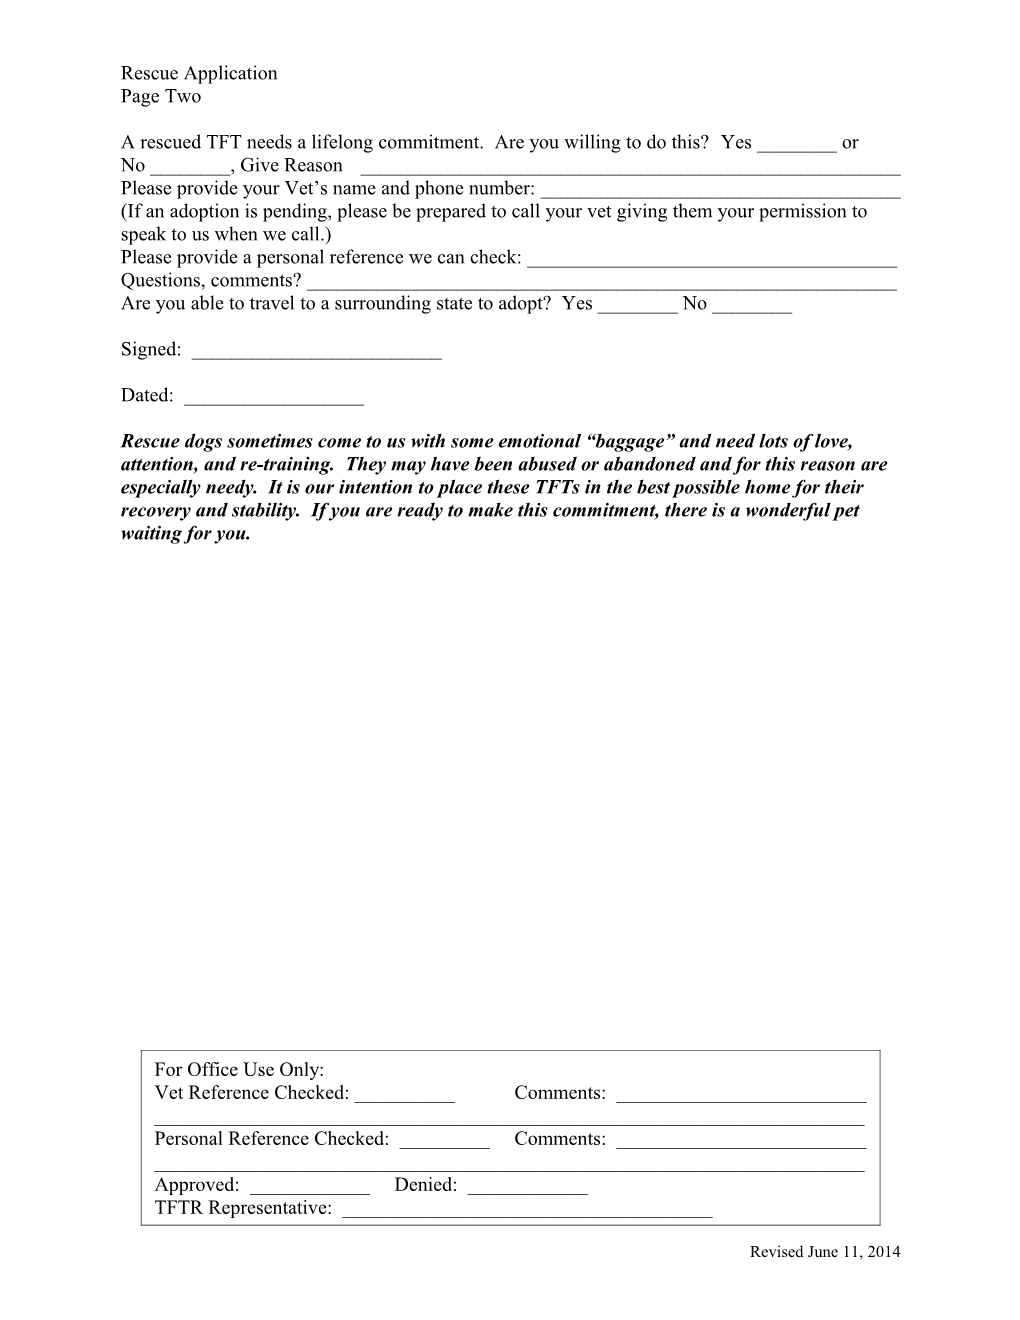 Fill out This Form with the Requested Information and Submit It to Us